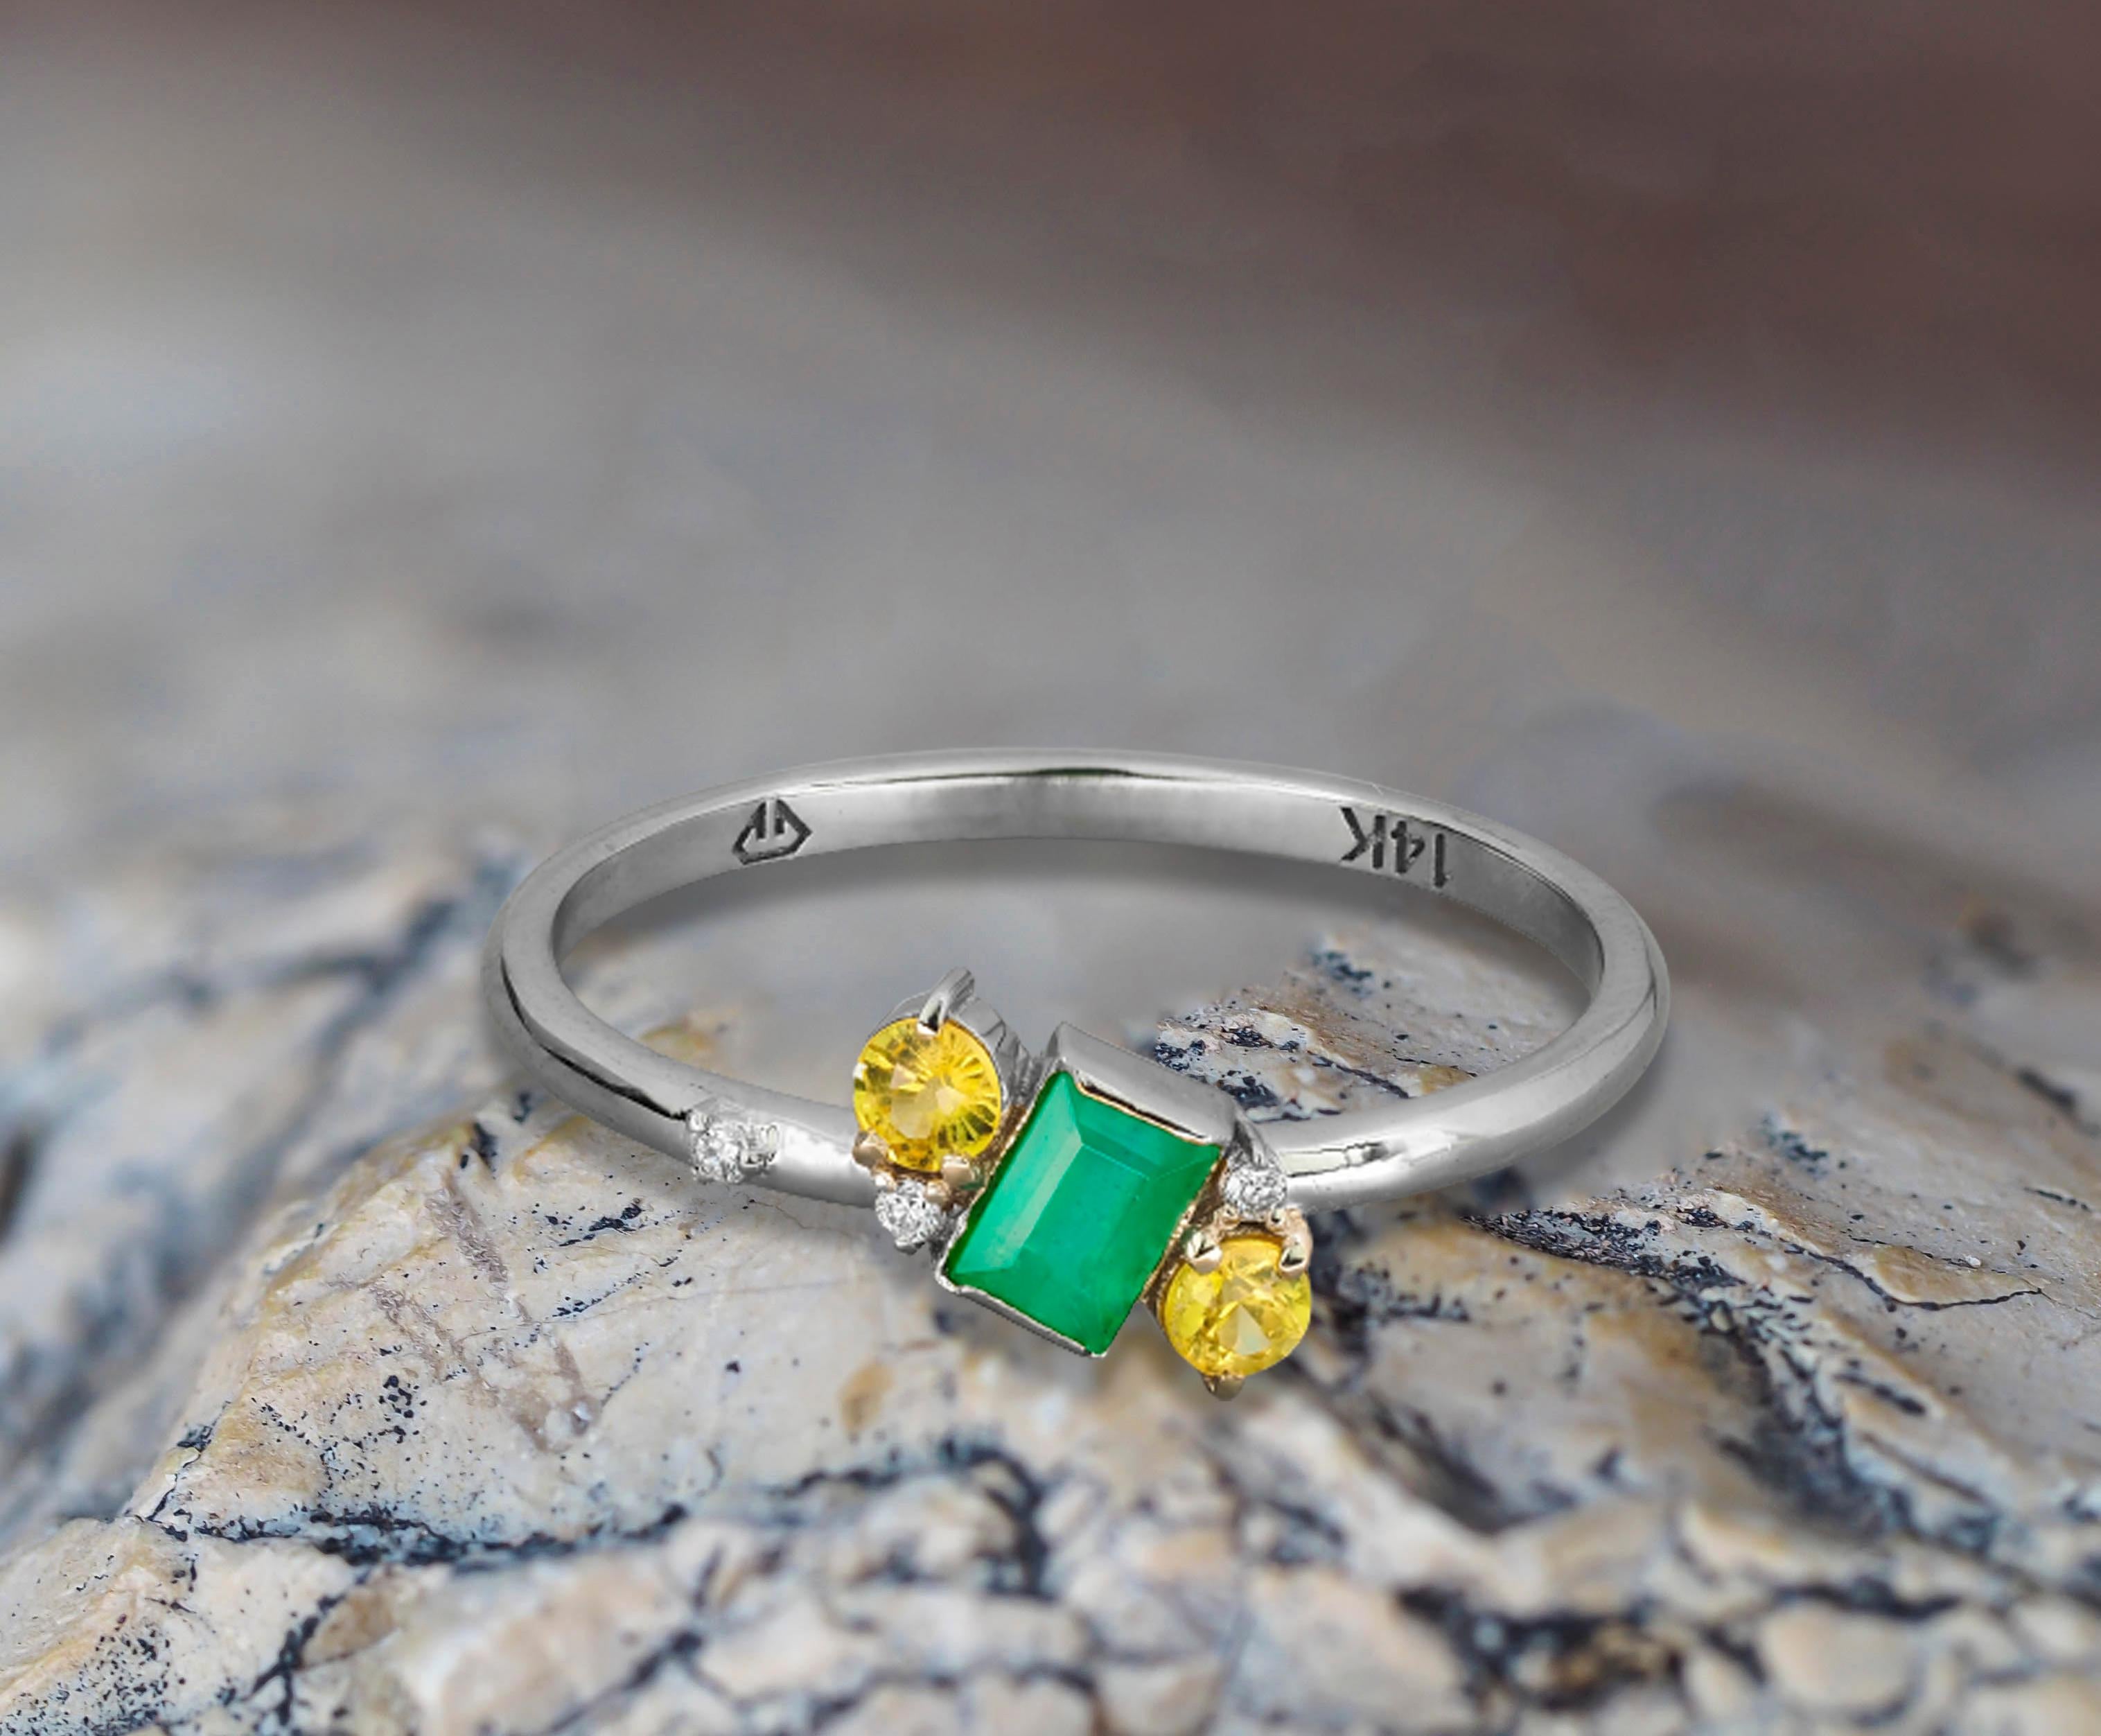 14k solid gold emerald ring. 
Baguette emerald ring. Minimalist ring. Tiny ring. Delicate ring. Emerald engagement ring. May Birthstone Ring.

Metal: 14k gold
Weight: 1.4 g. depends from size.

Set with emerald, color - green
emerald cut, 0.40 ct.